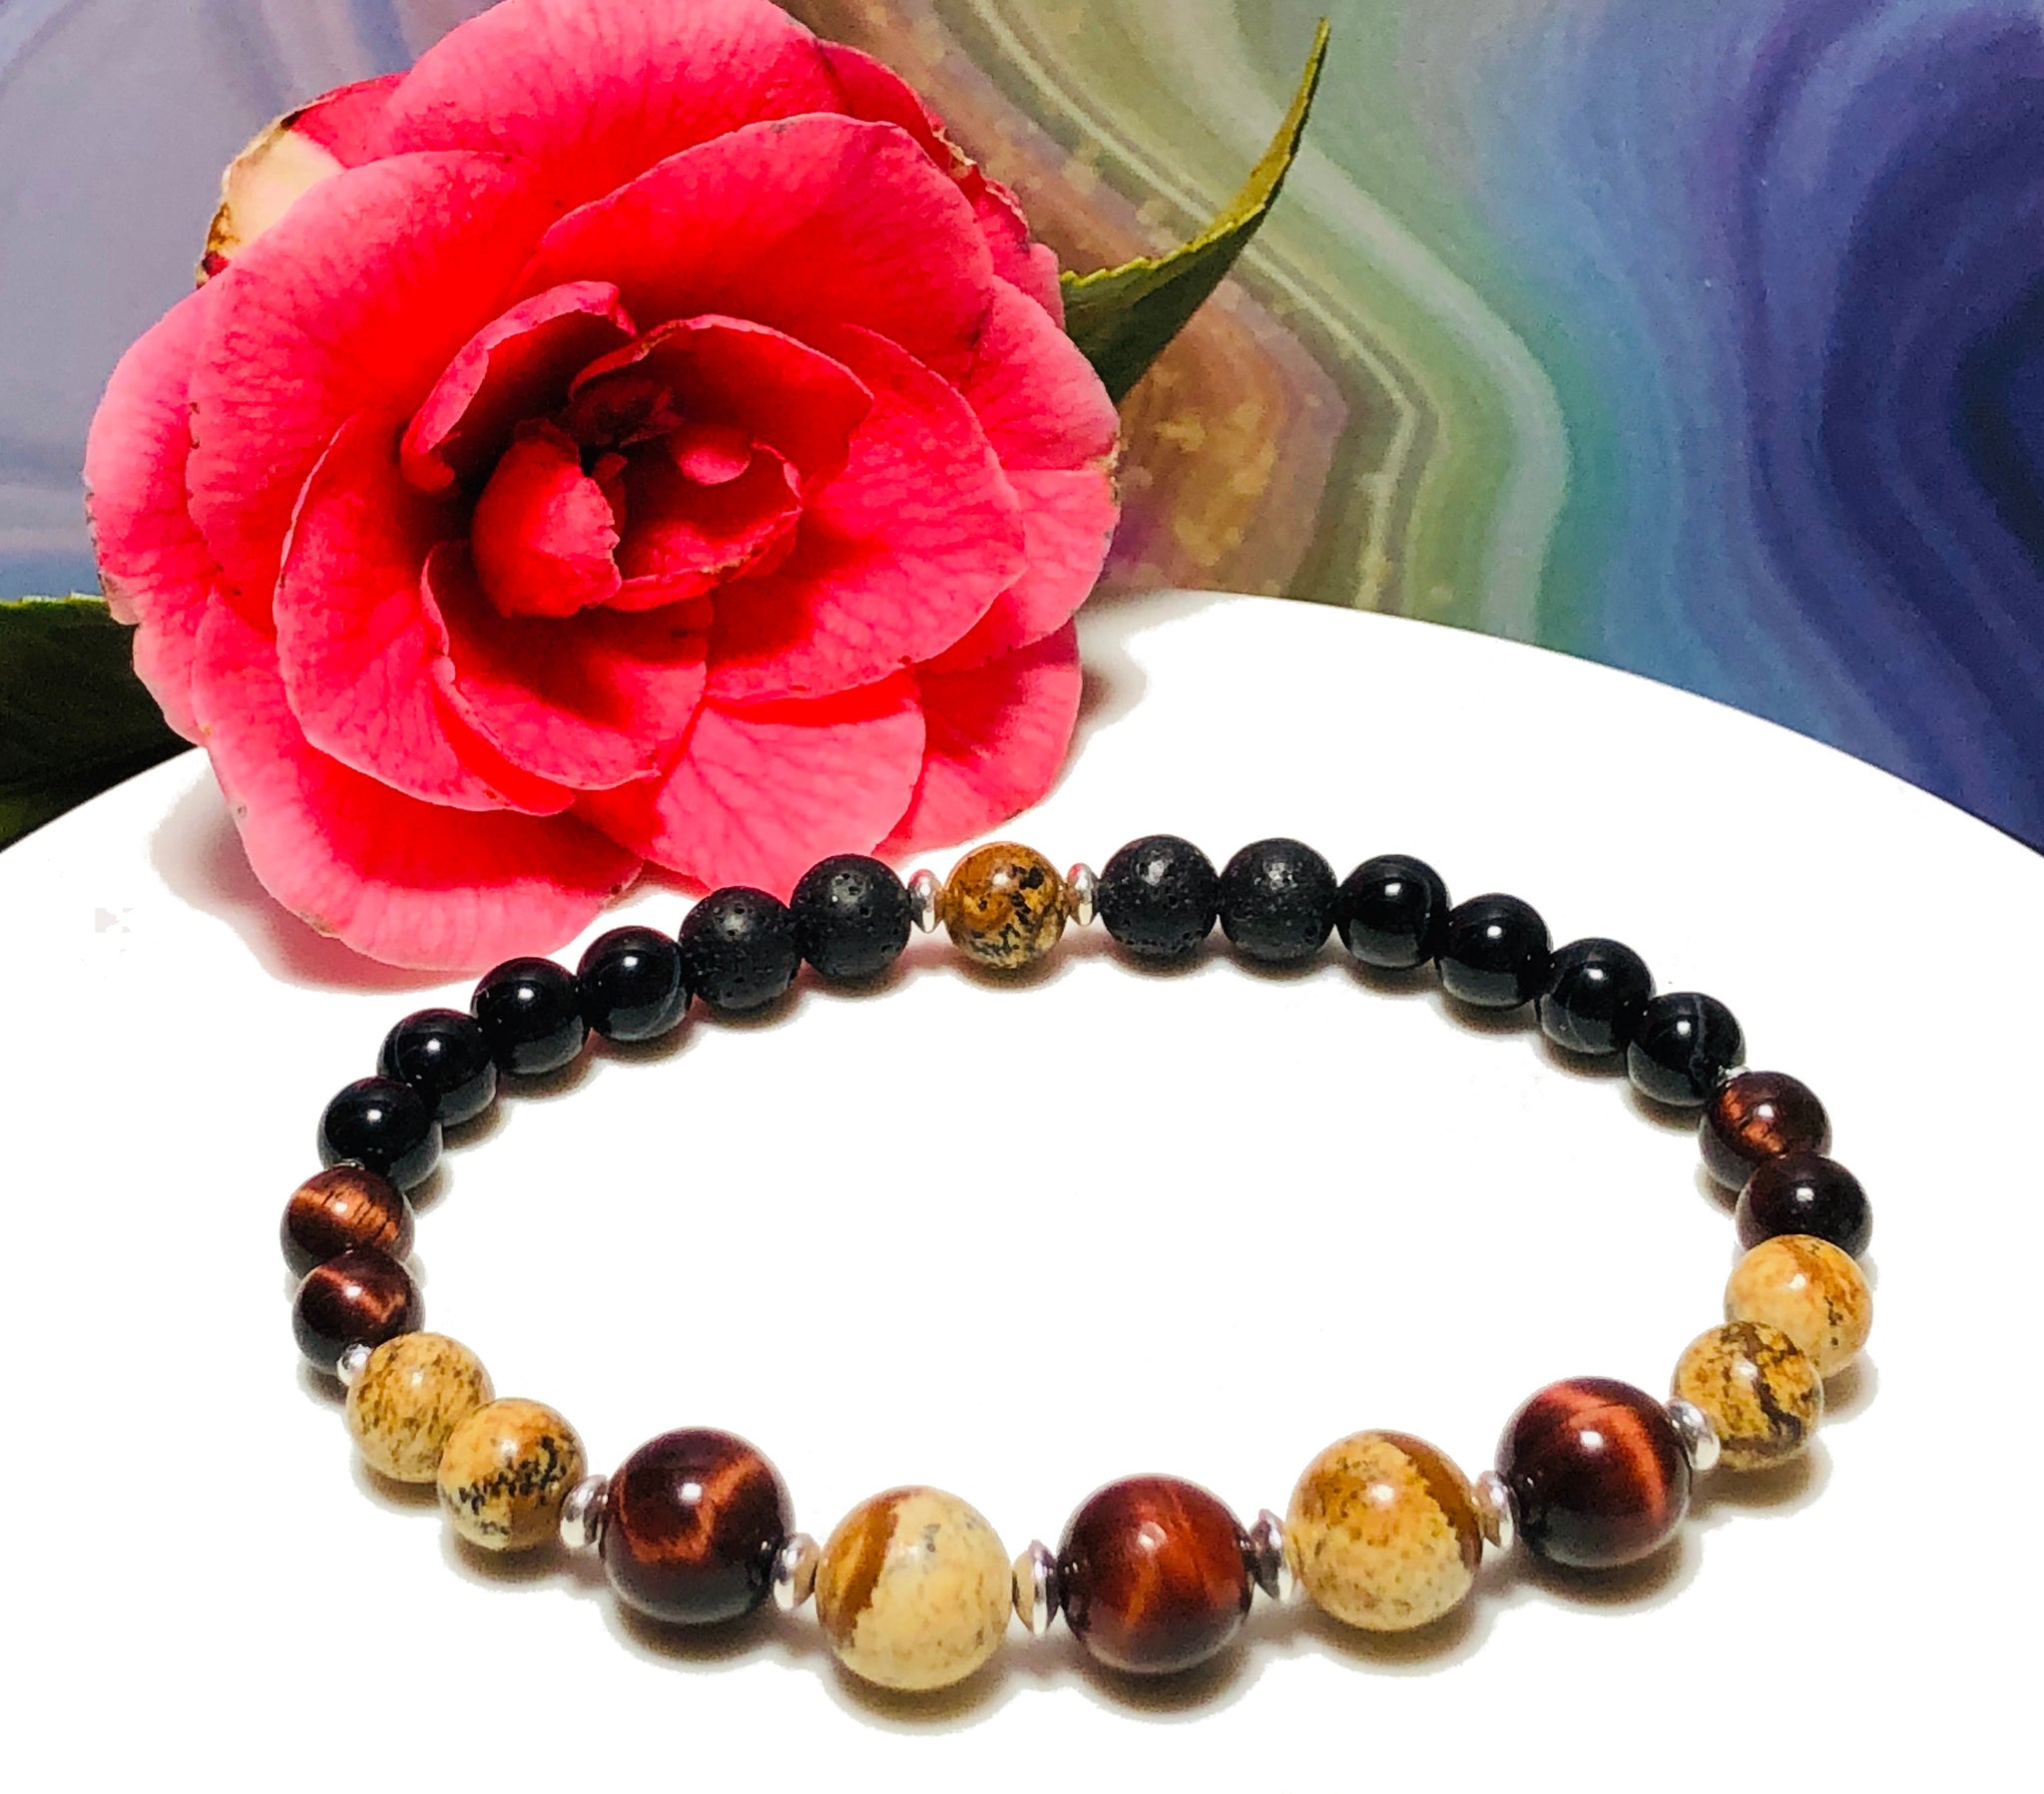 Buy CHITSHAKTI TRUST Amber Bracelet in 14K Gold Chain Crystal Stone with  Healing Benefits Online at Best Prices in India - JioMart.